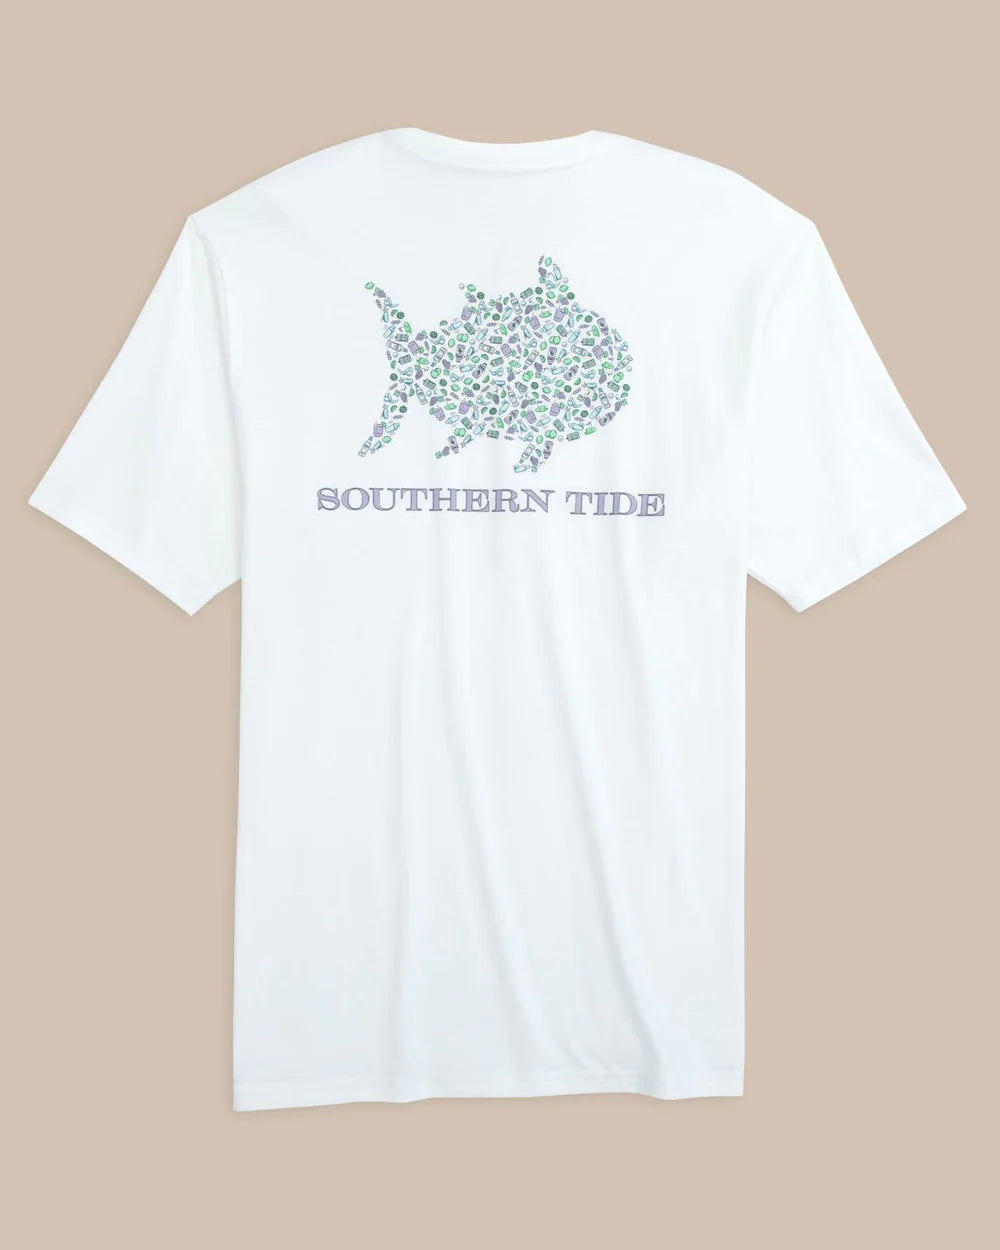 Southern Tide Men's Short Sleeve Dazed and Transfused Tee - Image 1